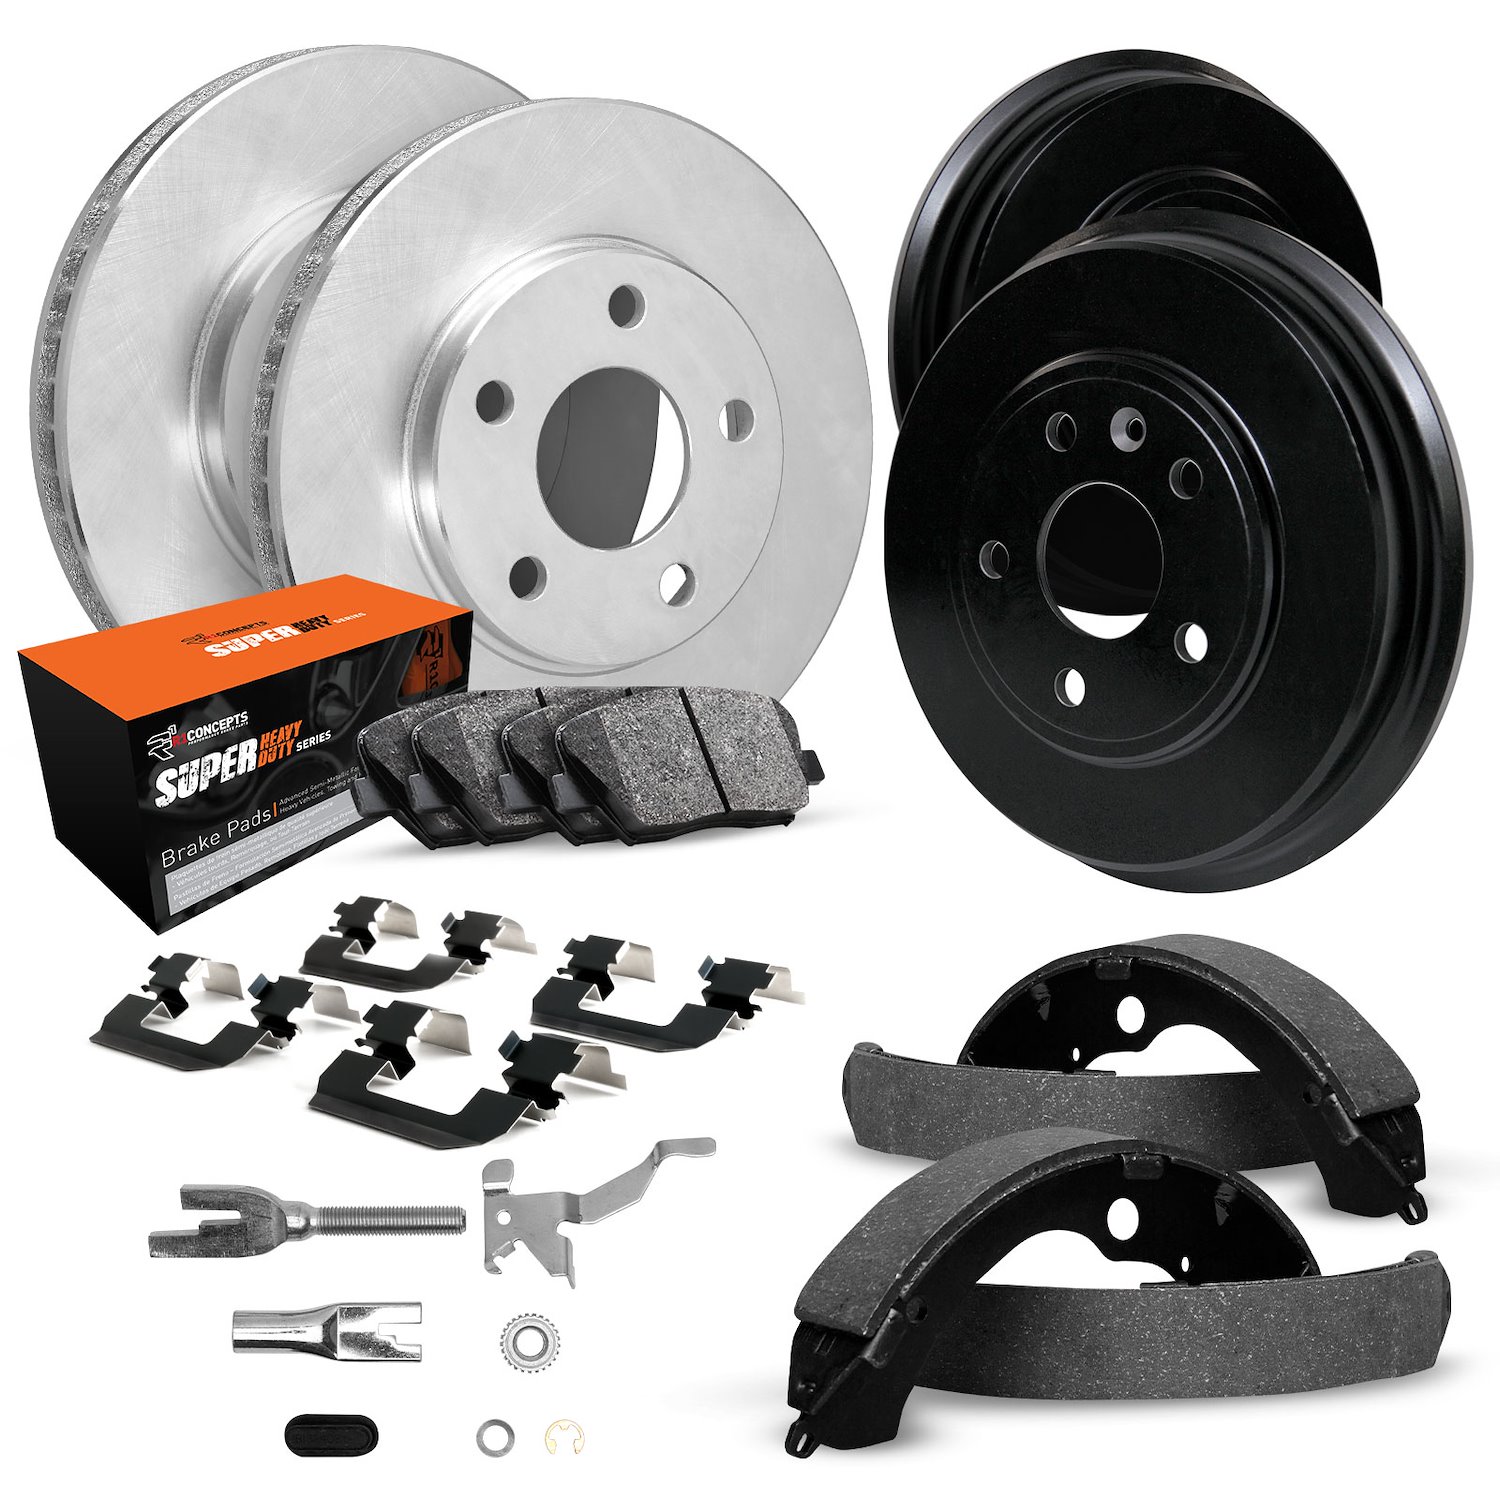 E-Line Blank Brake Rotor & Drum Set w/Super-Duty Pads, Shoes, Hardware, & Adjusters, 1979-1981 GM, Position: Front & Rear